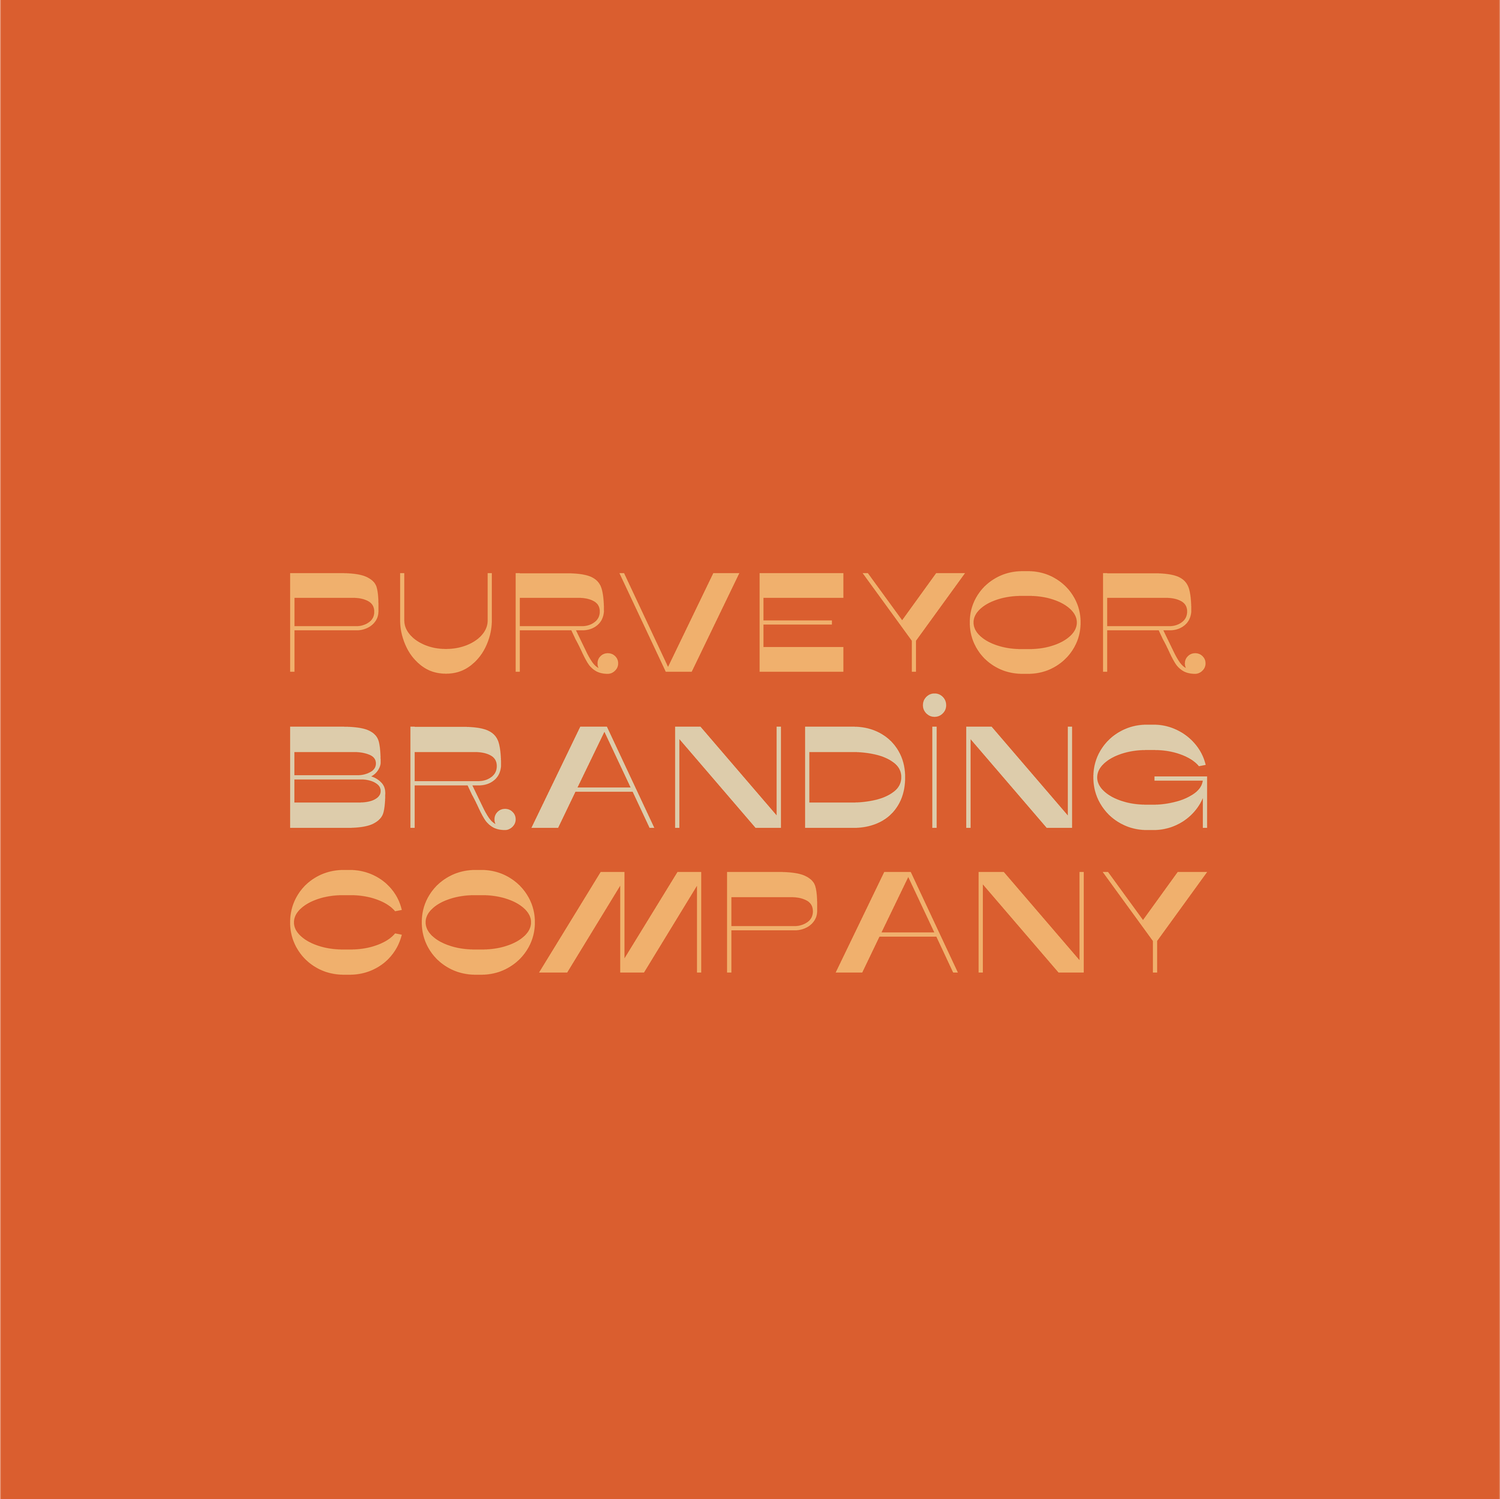 Organizations That Want to Grow Should Turn to Purveyor Branding Co.